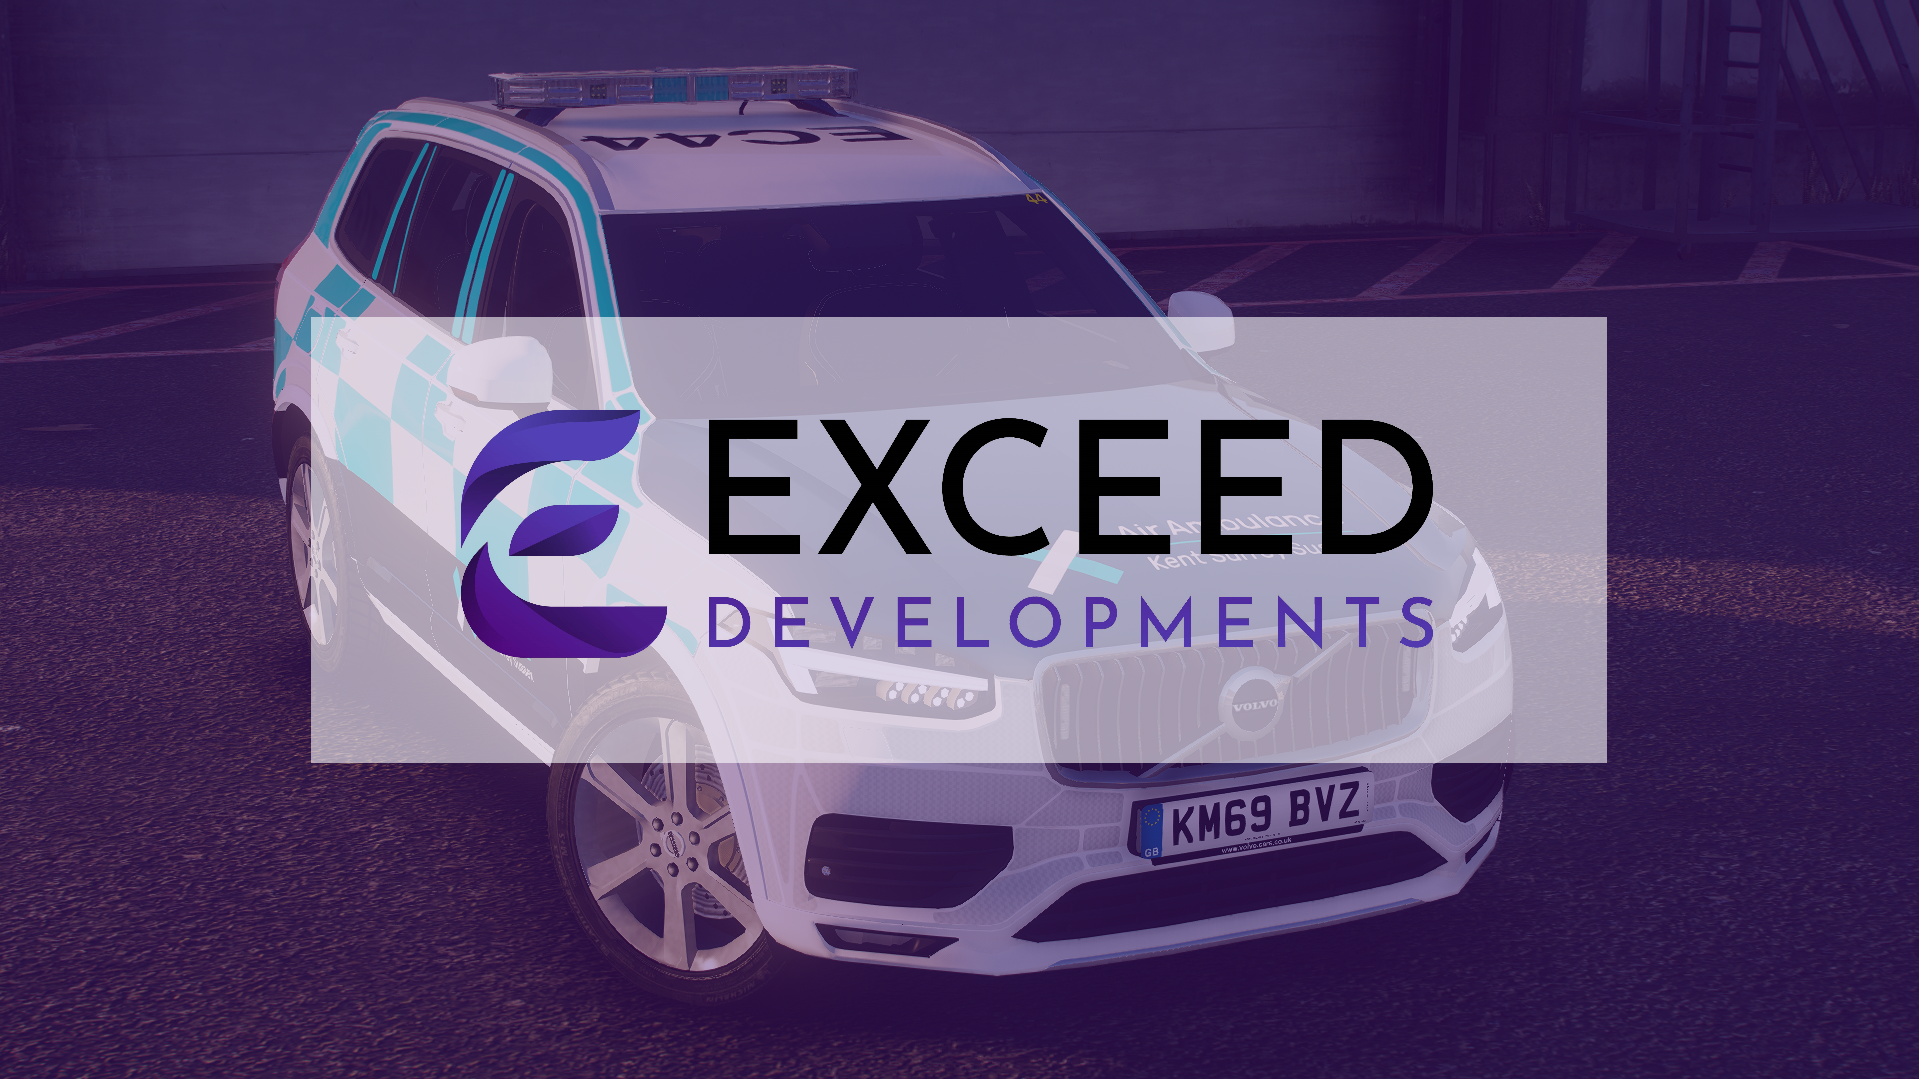 Partnership with Exceed Developments